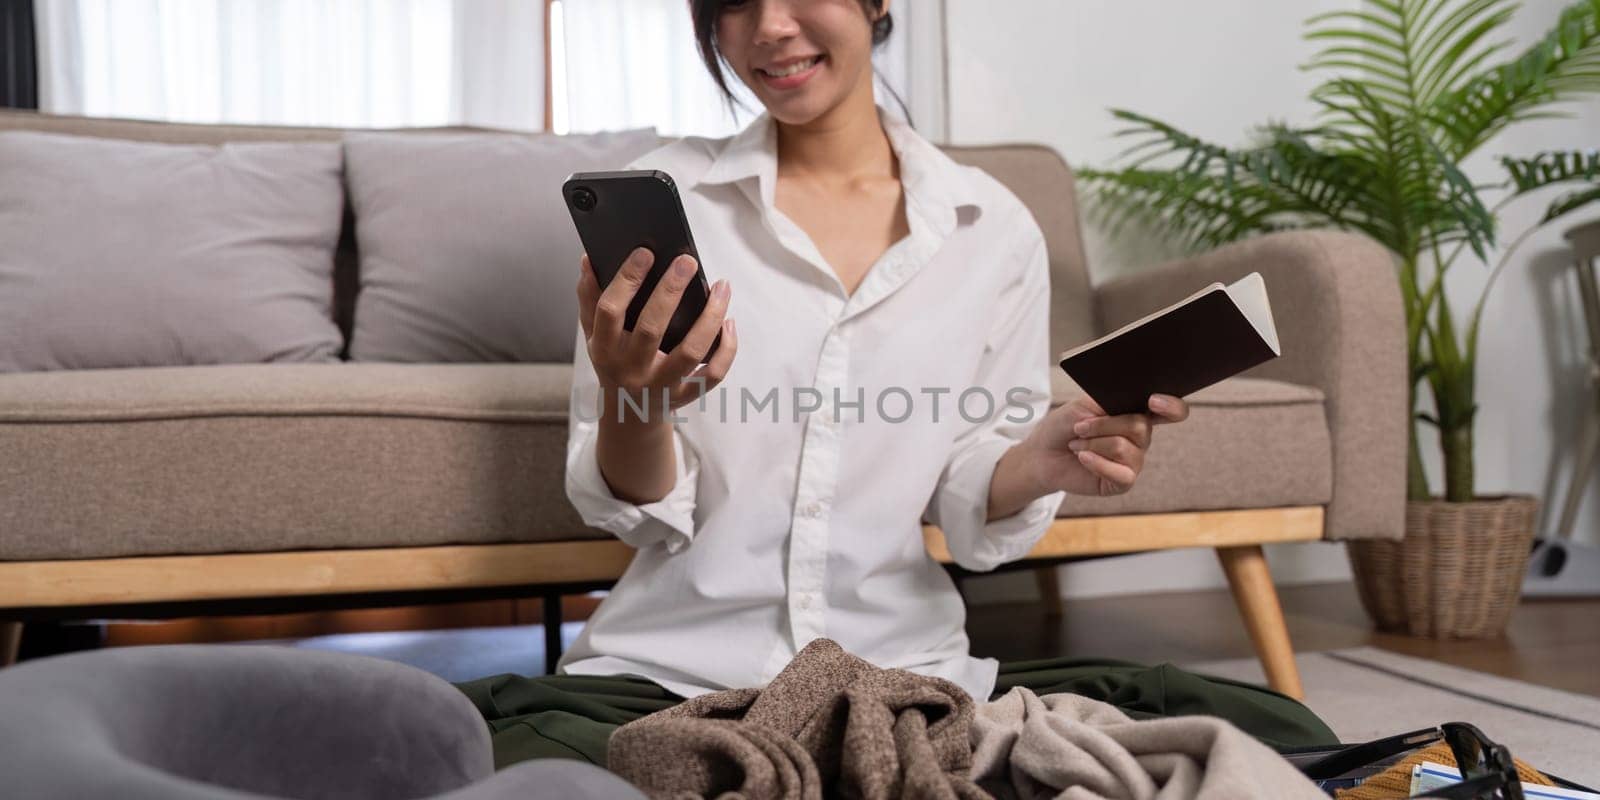 Young traveler woman using smartphone to book a hotel and search for tourist attraction information while prepare travel suitcase before going on summer vacation. Online booking concept.